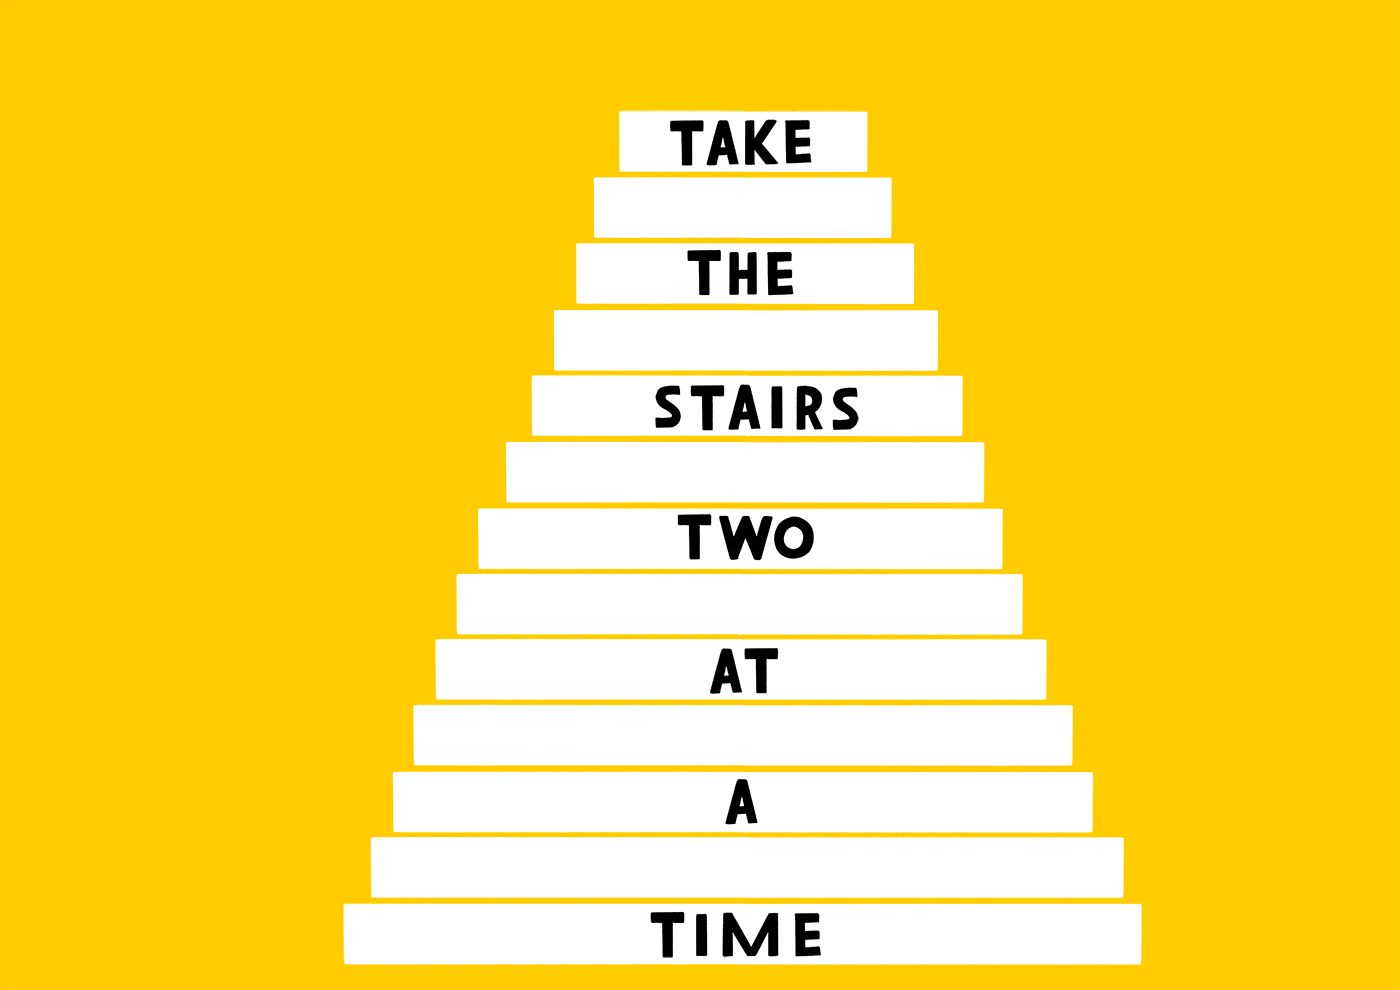 Take the stairs two at a time